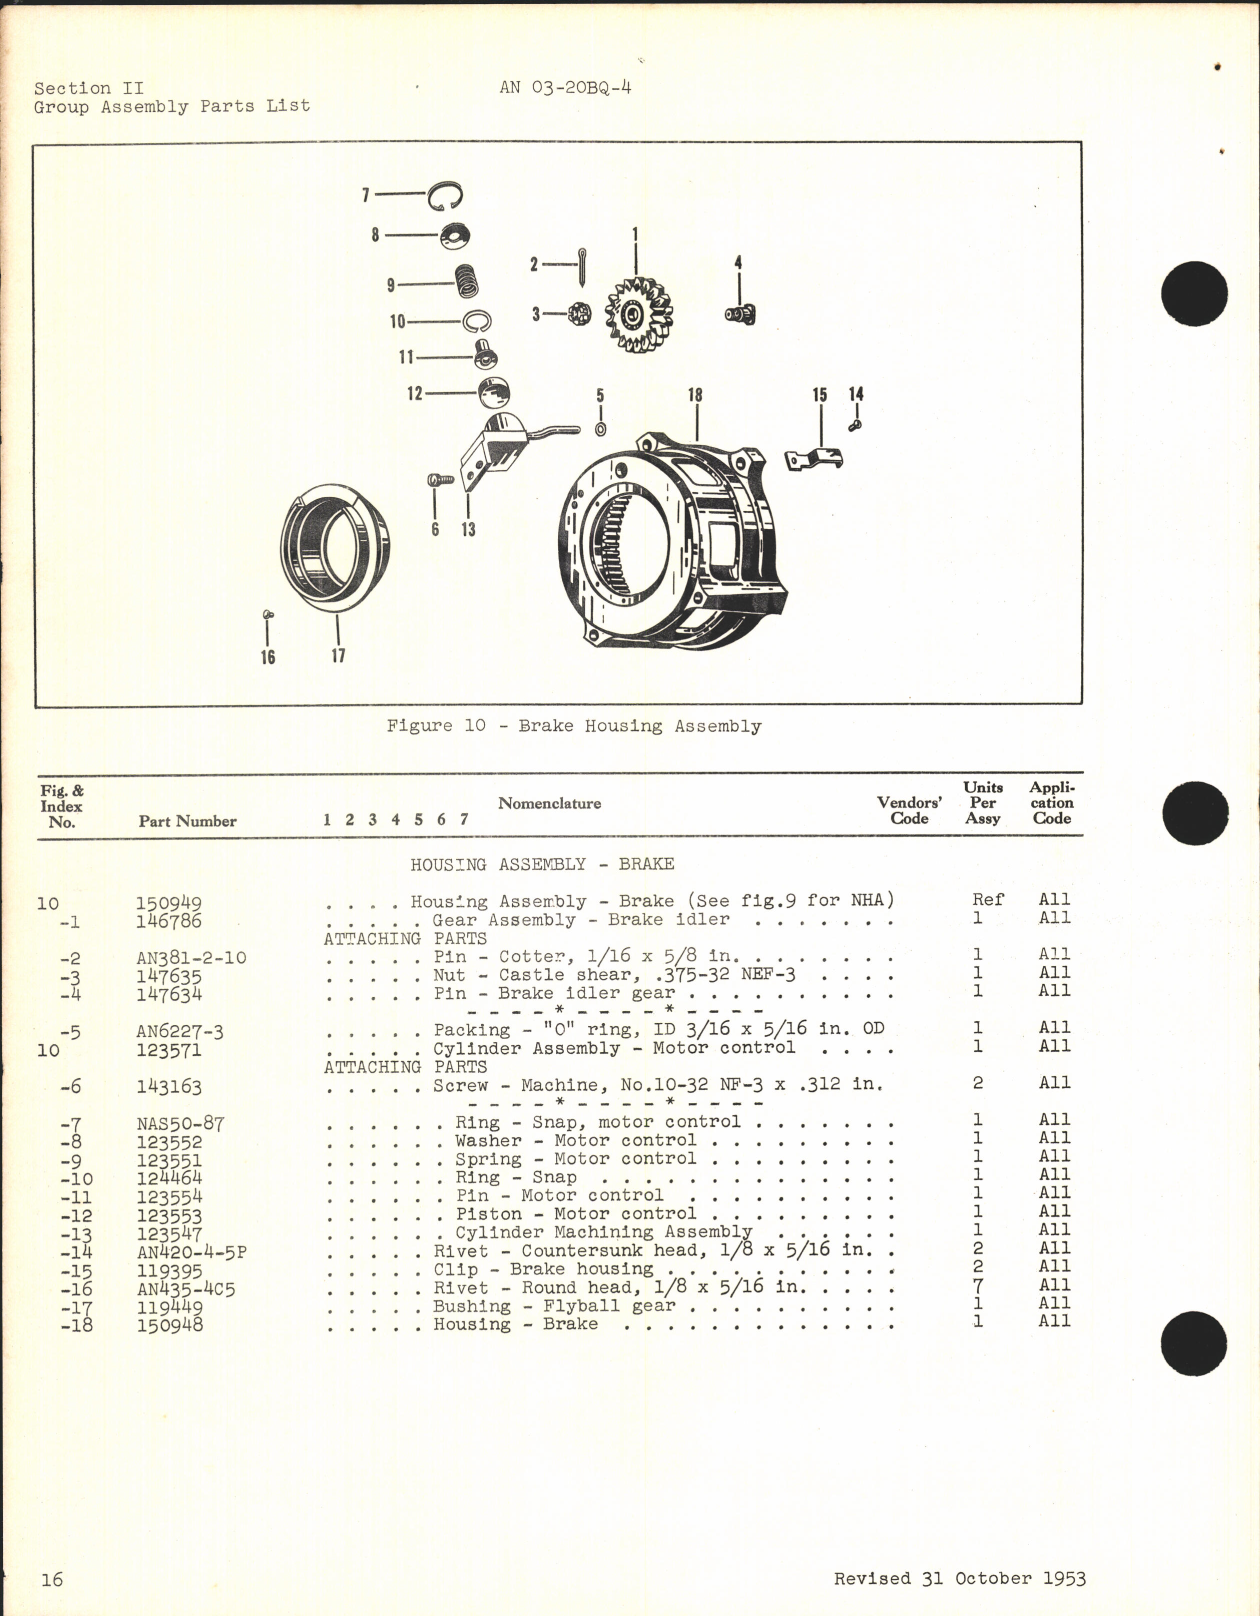 Sample page 6 from AirCorps Library document: Parts Catalog for Curtiss Propeller Models C646SP-A